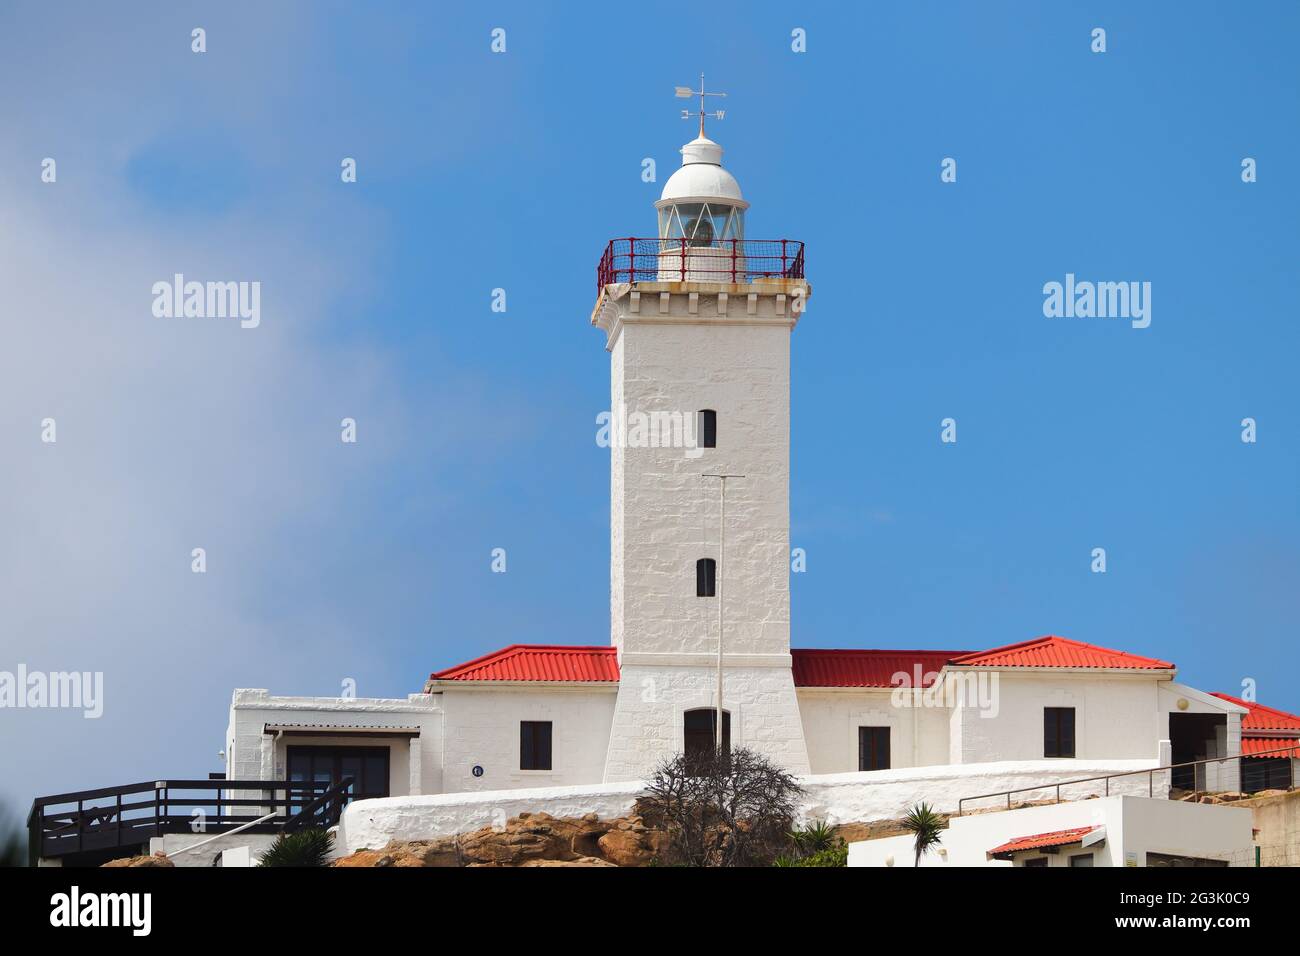 White Lighthouse Tower Building At Cape St. Blaize Stock Photo